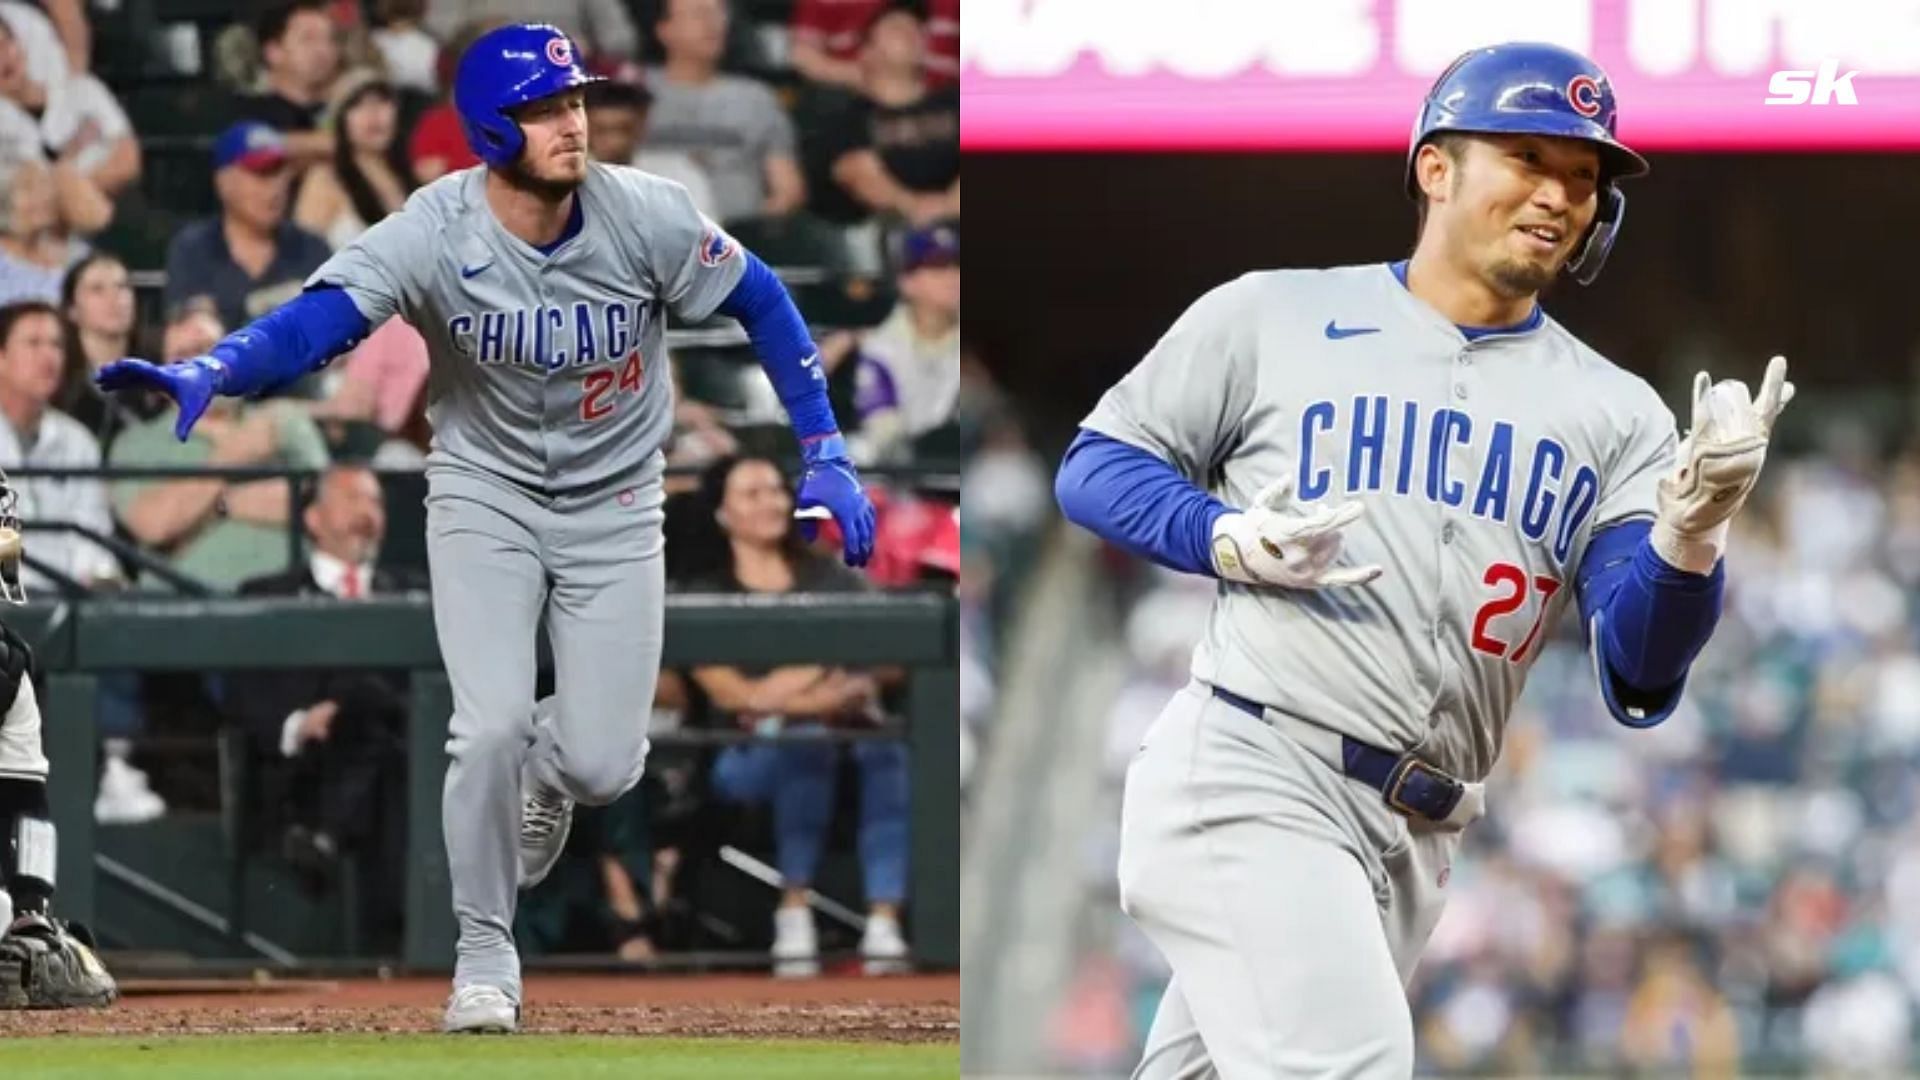 Cubs News: Cody Bellinger and Seiya Suzuki could be back in lineup as early as next week, per manager Craig Counsell